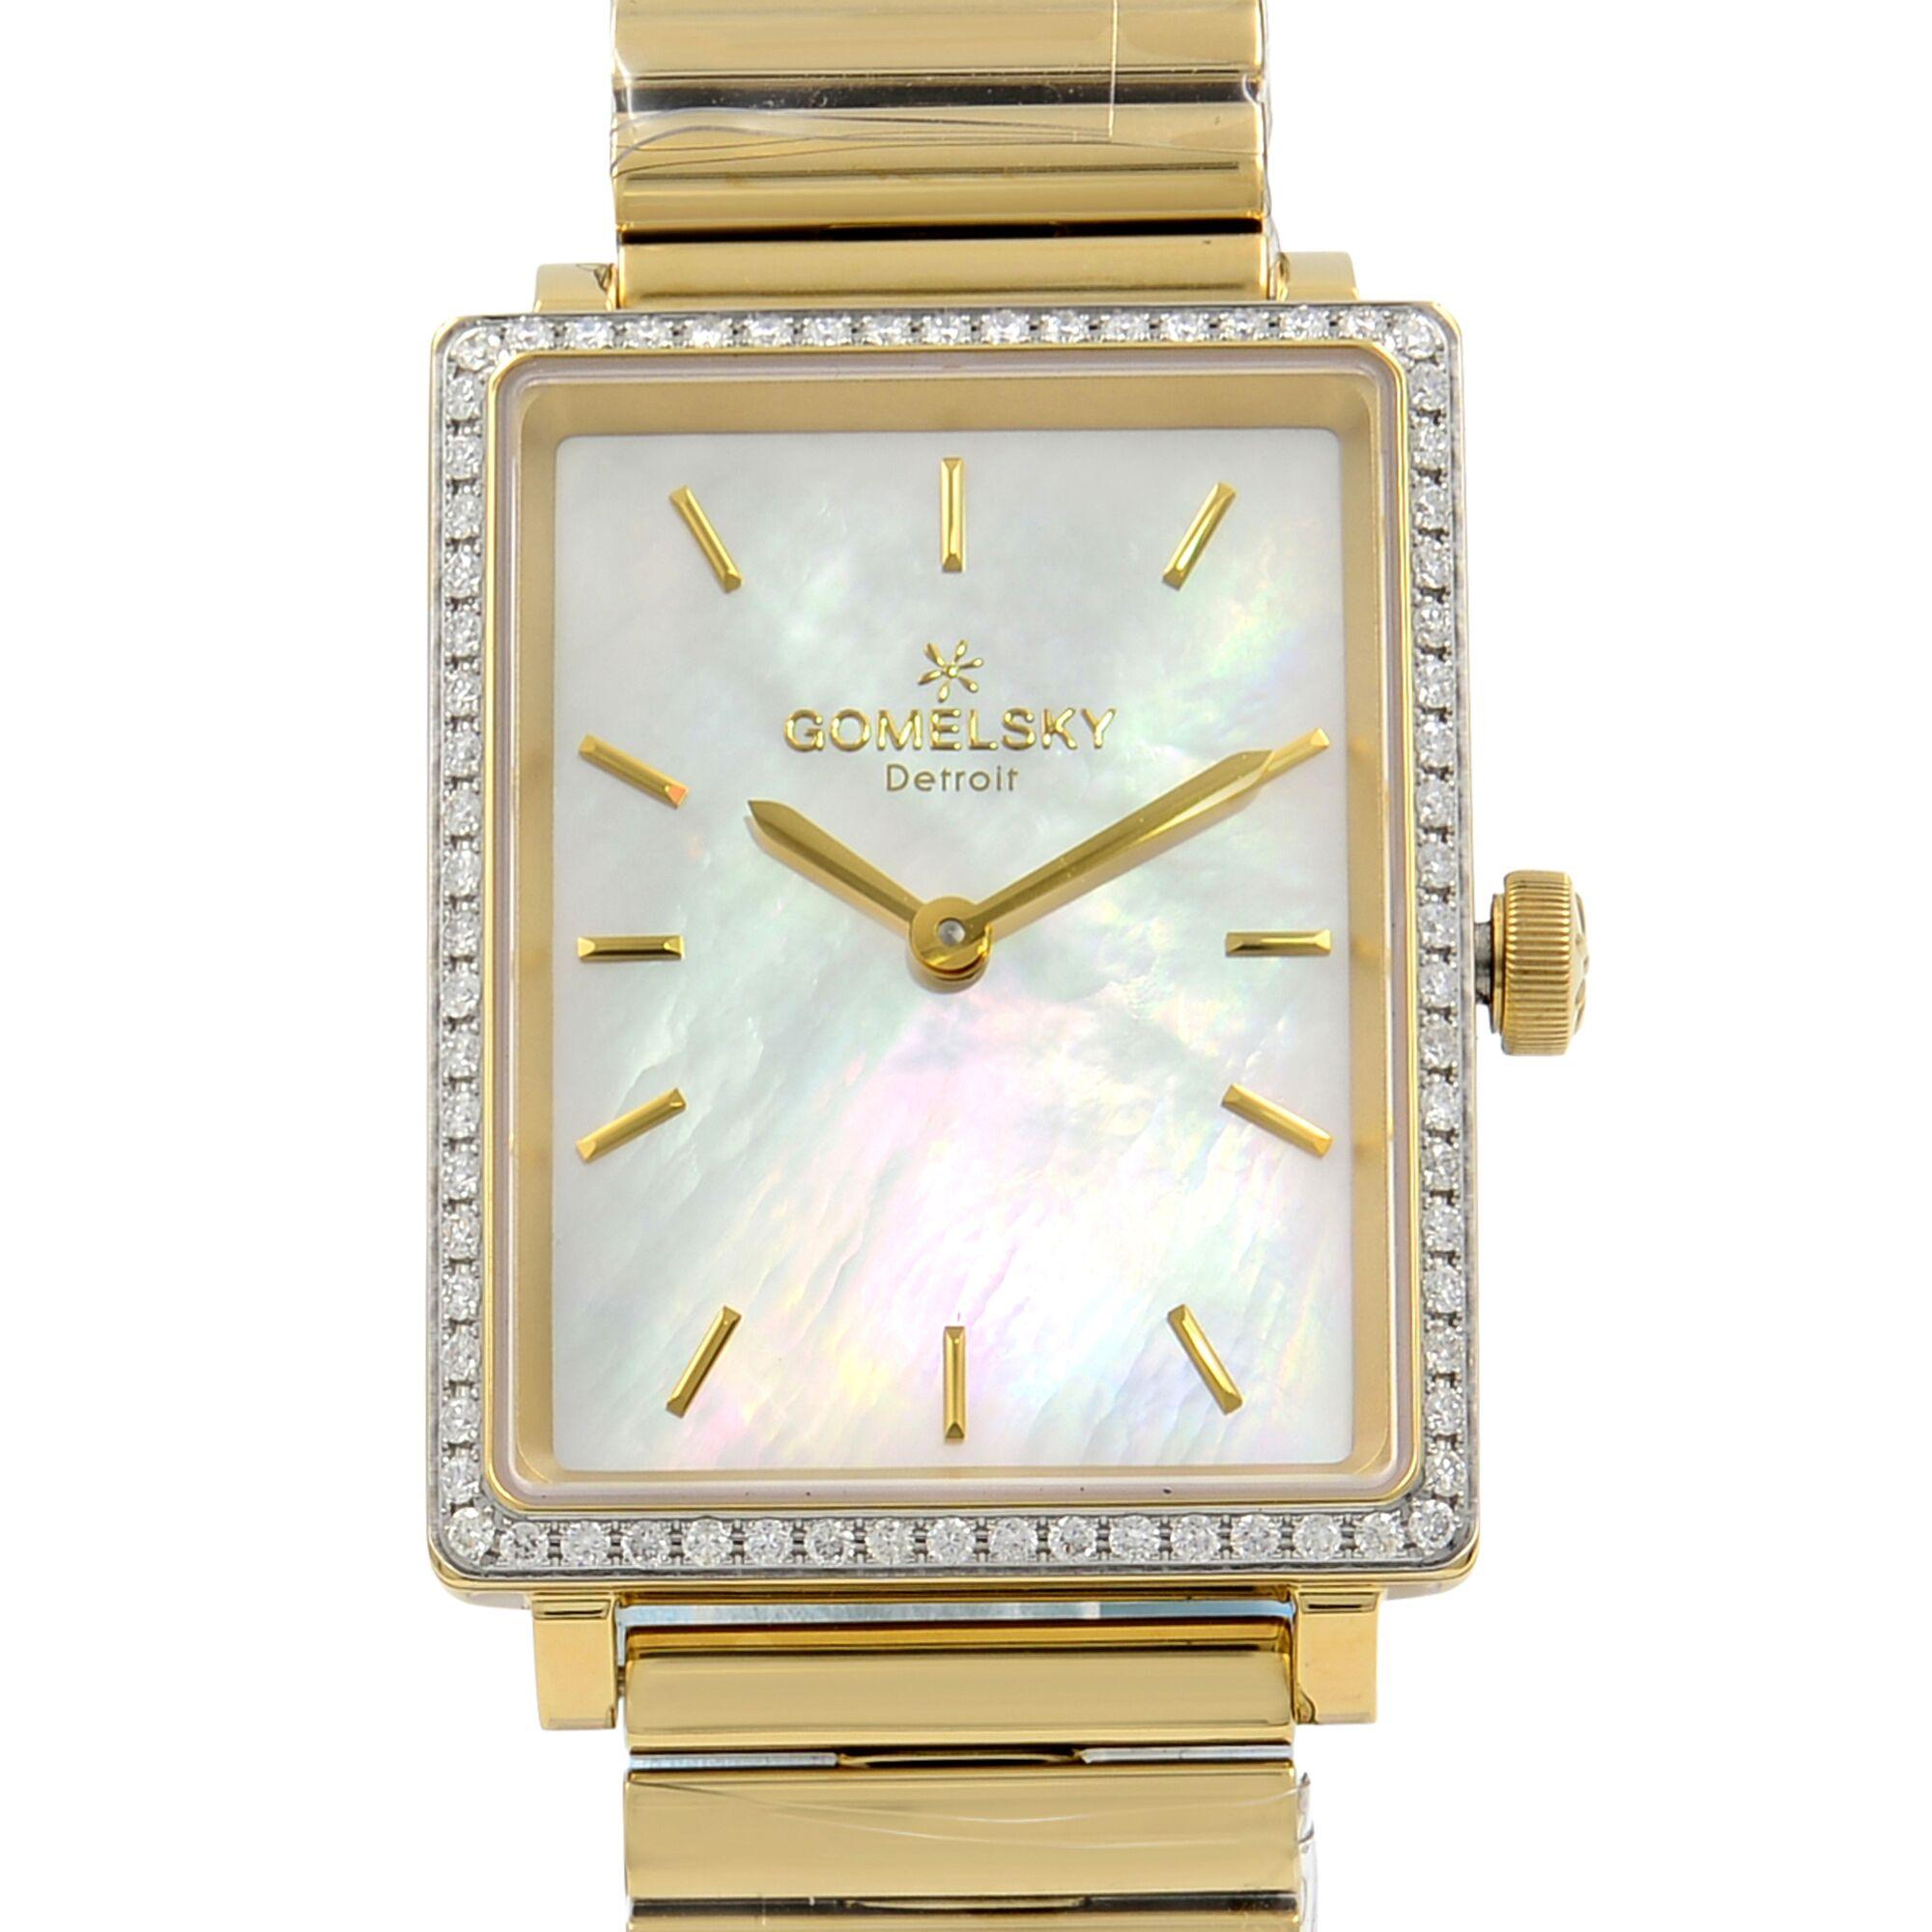 This brand new Gomelsky Shirley Fromer G0120072642 is a beautiful Ladies timepiece that is powered by a quartz movement which is cased in a stainless steel case. It has a  rectangle shape face,  dial, and has hand sticks style markers. It is